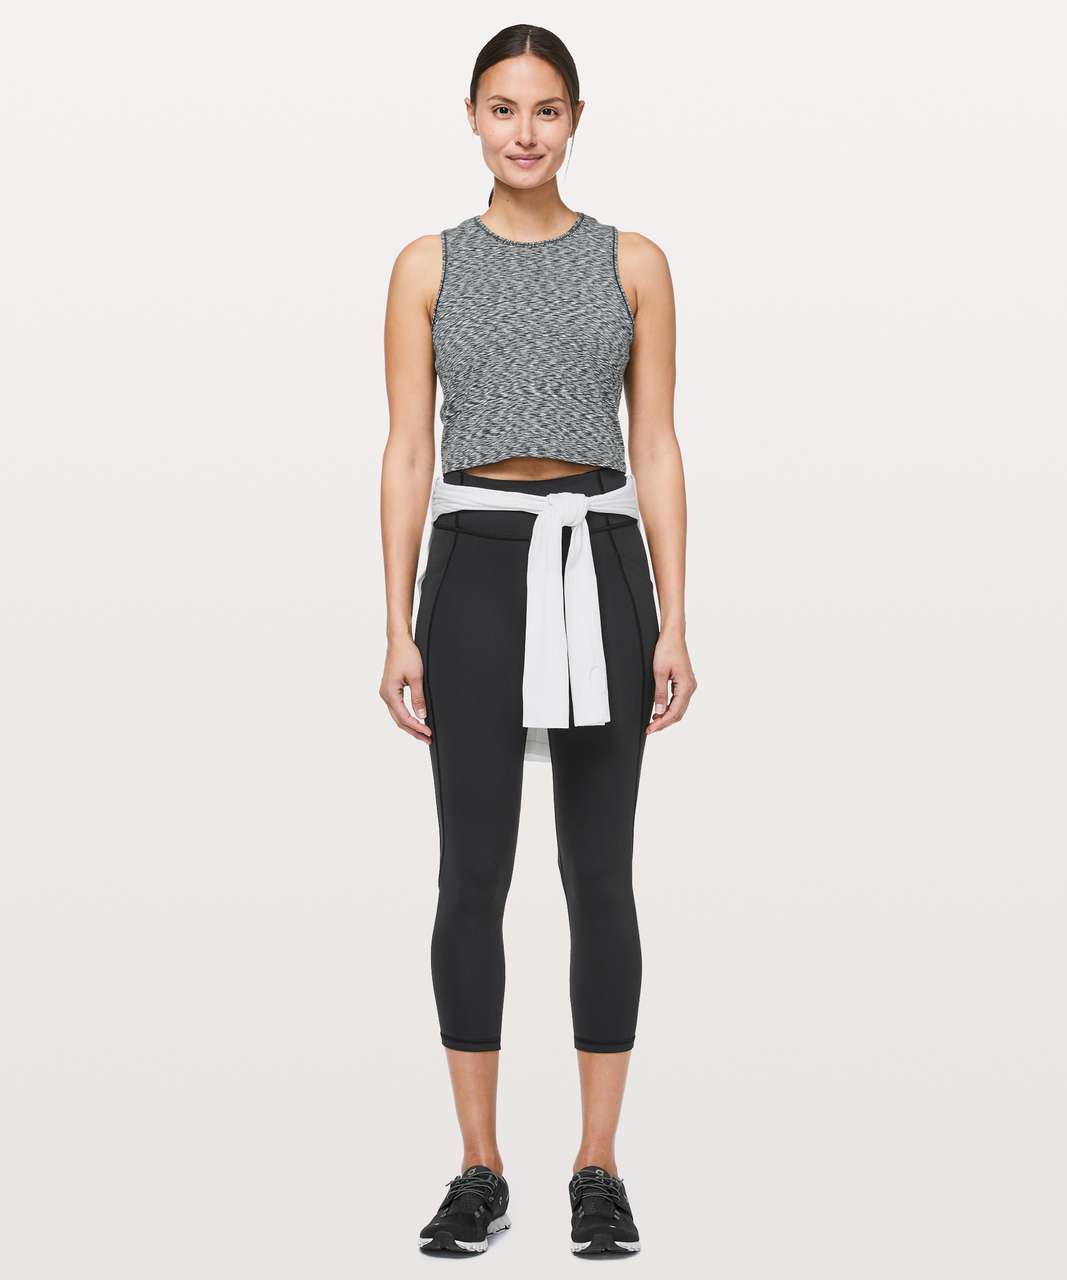 Lululemon Cinch Me Up Tank - Spaced Out Space Dye Black White